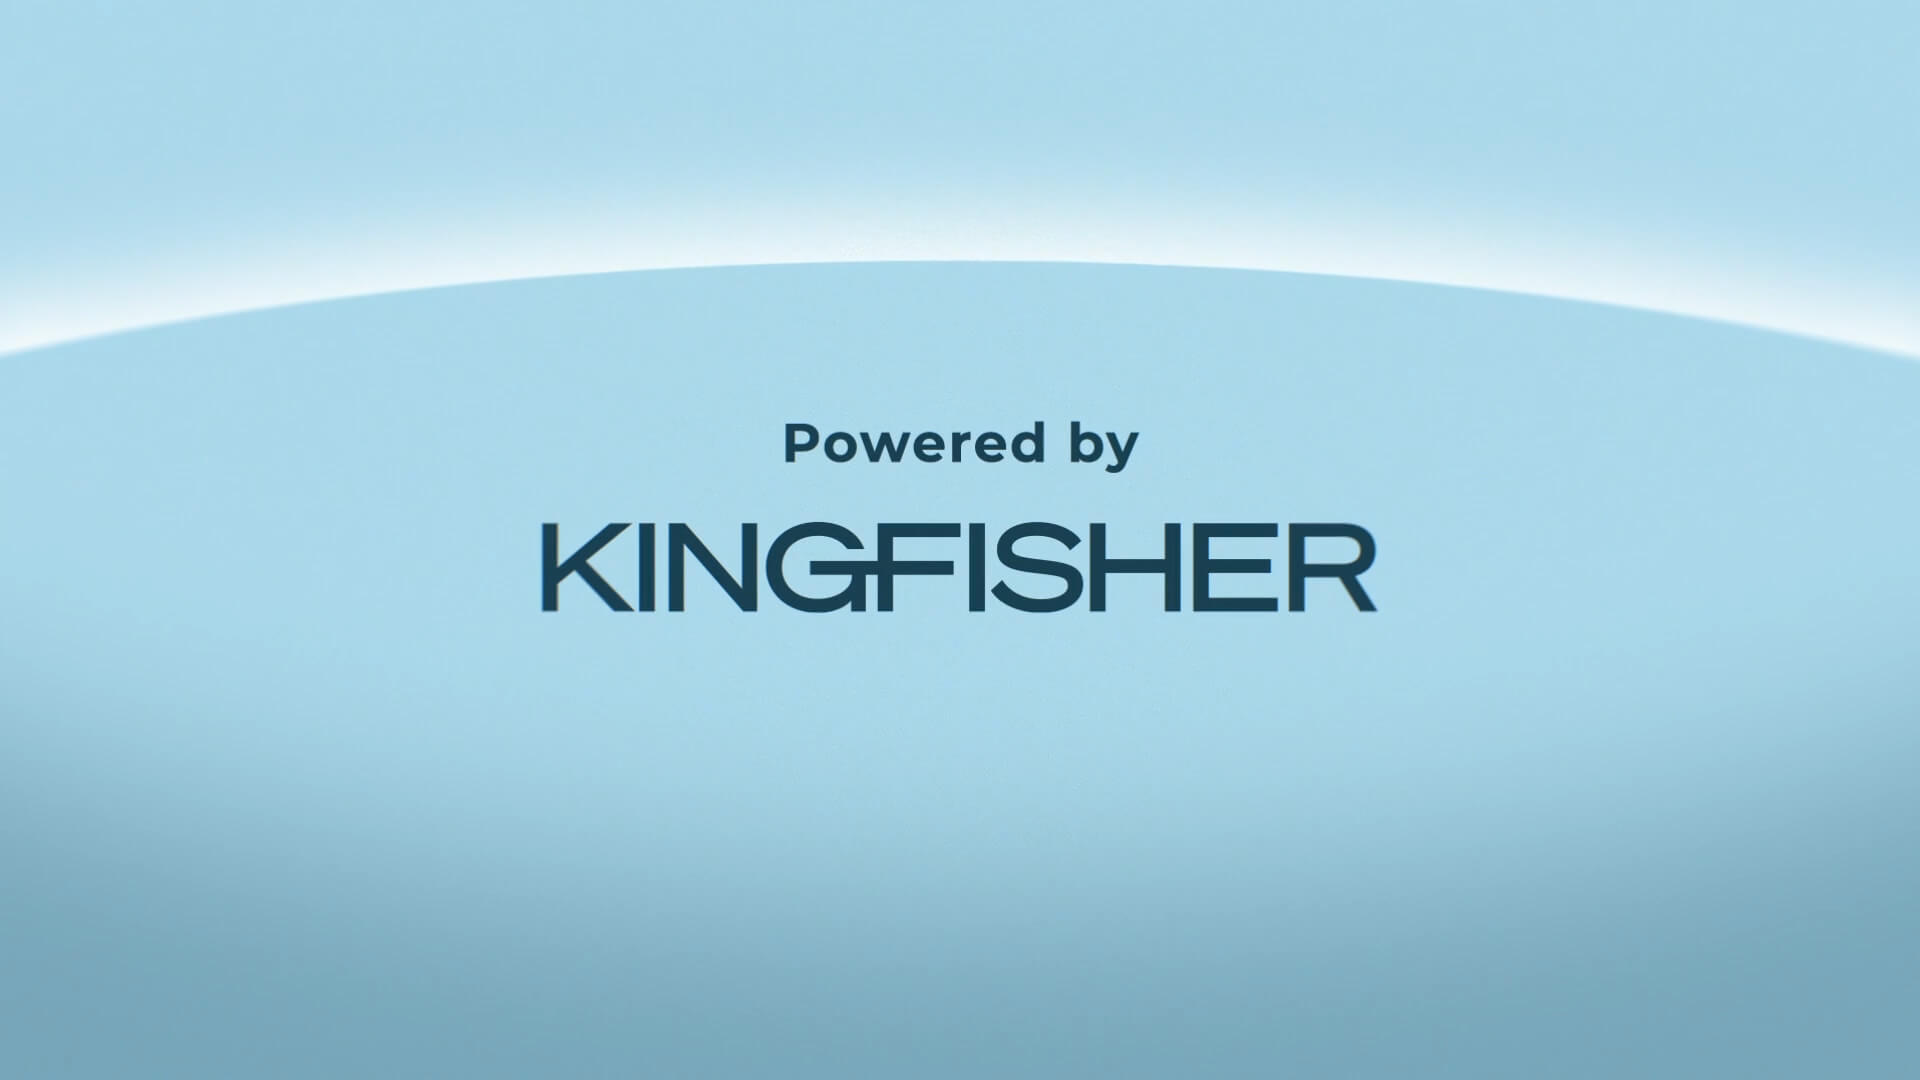 The Kingfisher logo on a blue background.